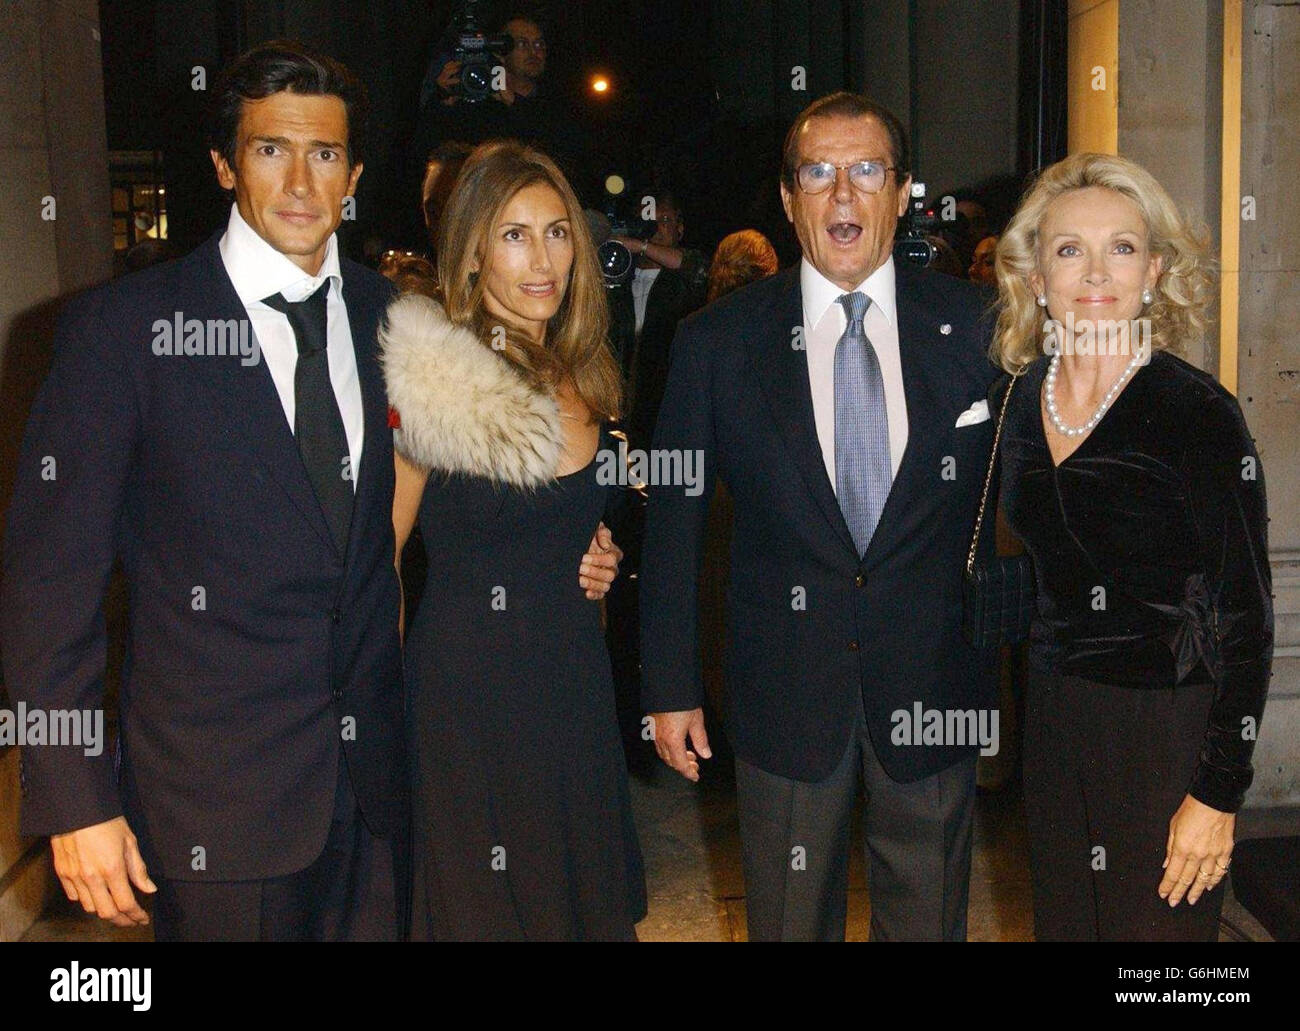 (From left to right) Geoffrey Moore and wife Loulou, Sir Roger Moore and wife Kiki Tholstrup arrive for a cocktail party launch of the Giorgio Armani: A Retrospective exhibition at the Royal Academy of Arts in central London. Stock Photo